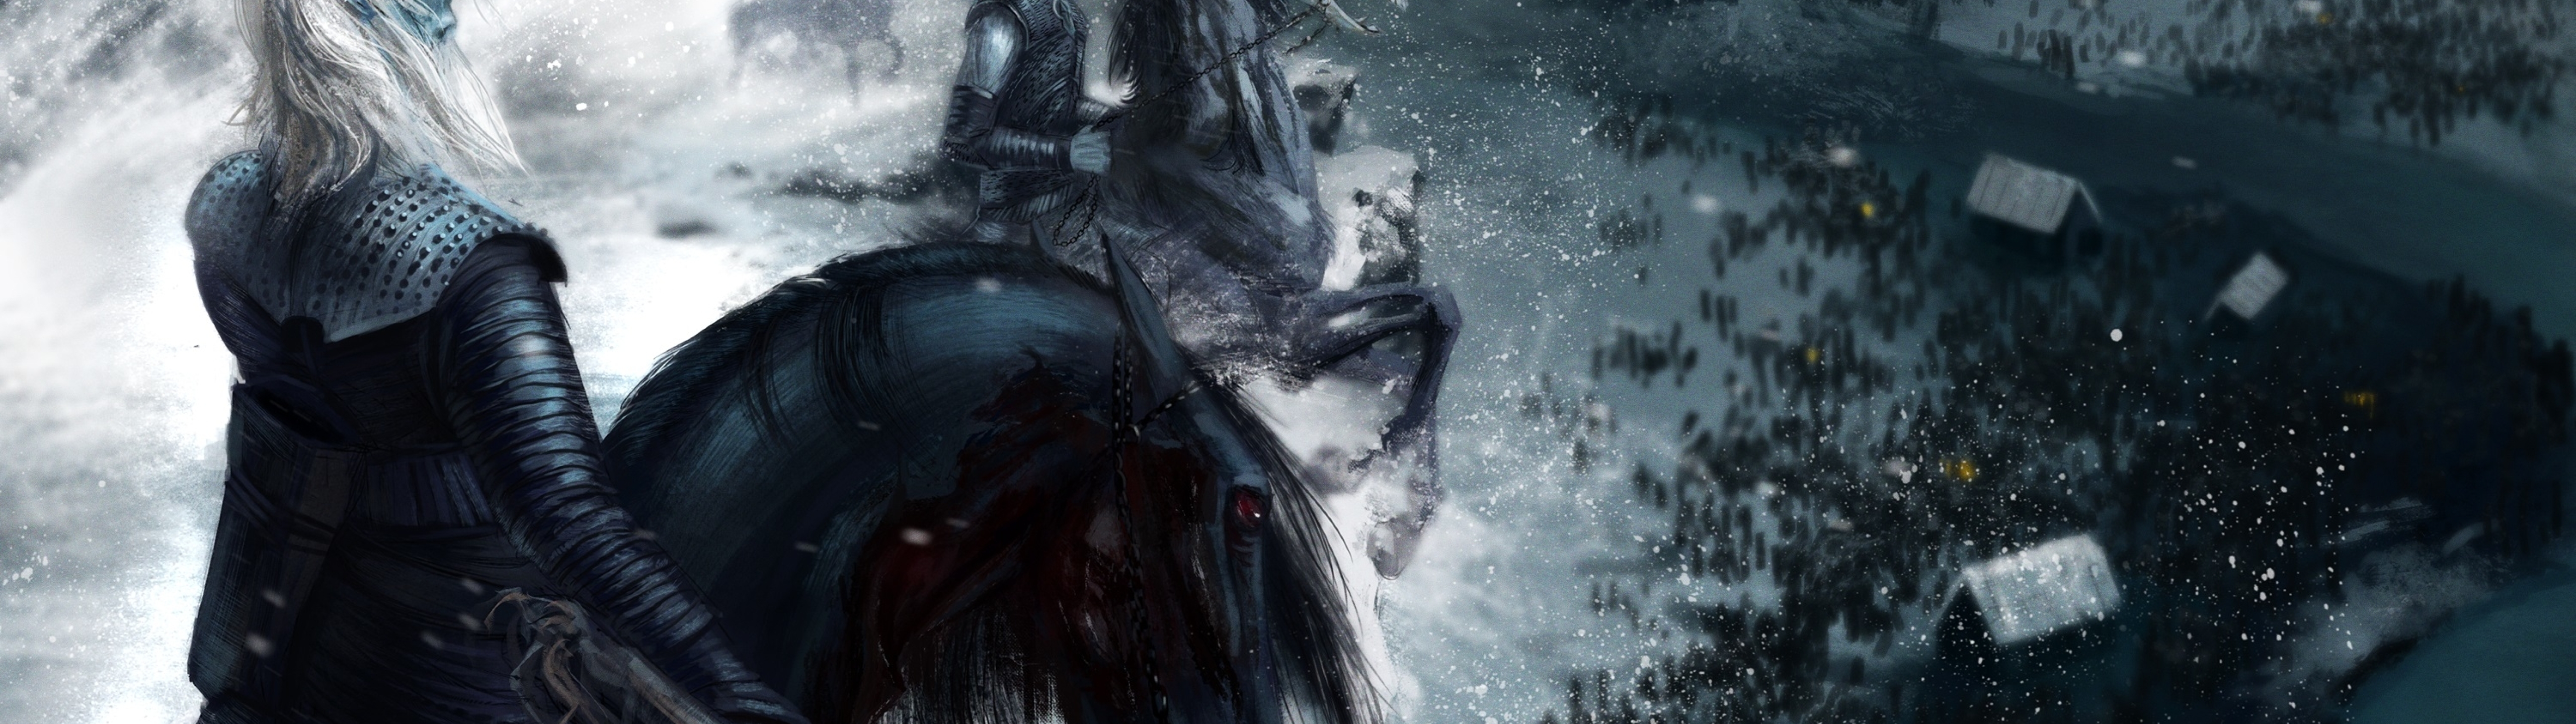 5120x1440 Game Of Thrones White Walker Artwork 5120x1440 Resolution  Wallpaper, HD Movies 4K Wallpapers, Images, Photos and Background -  Wallpapers Den